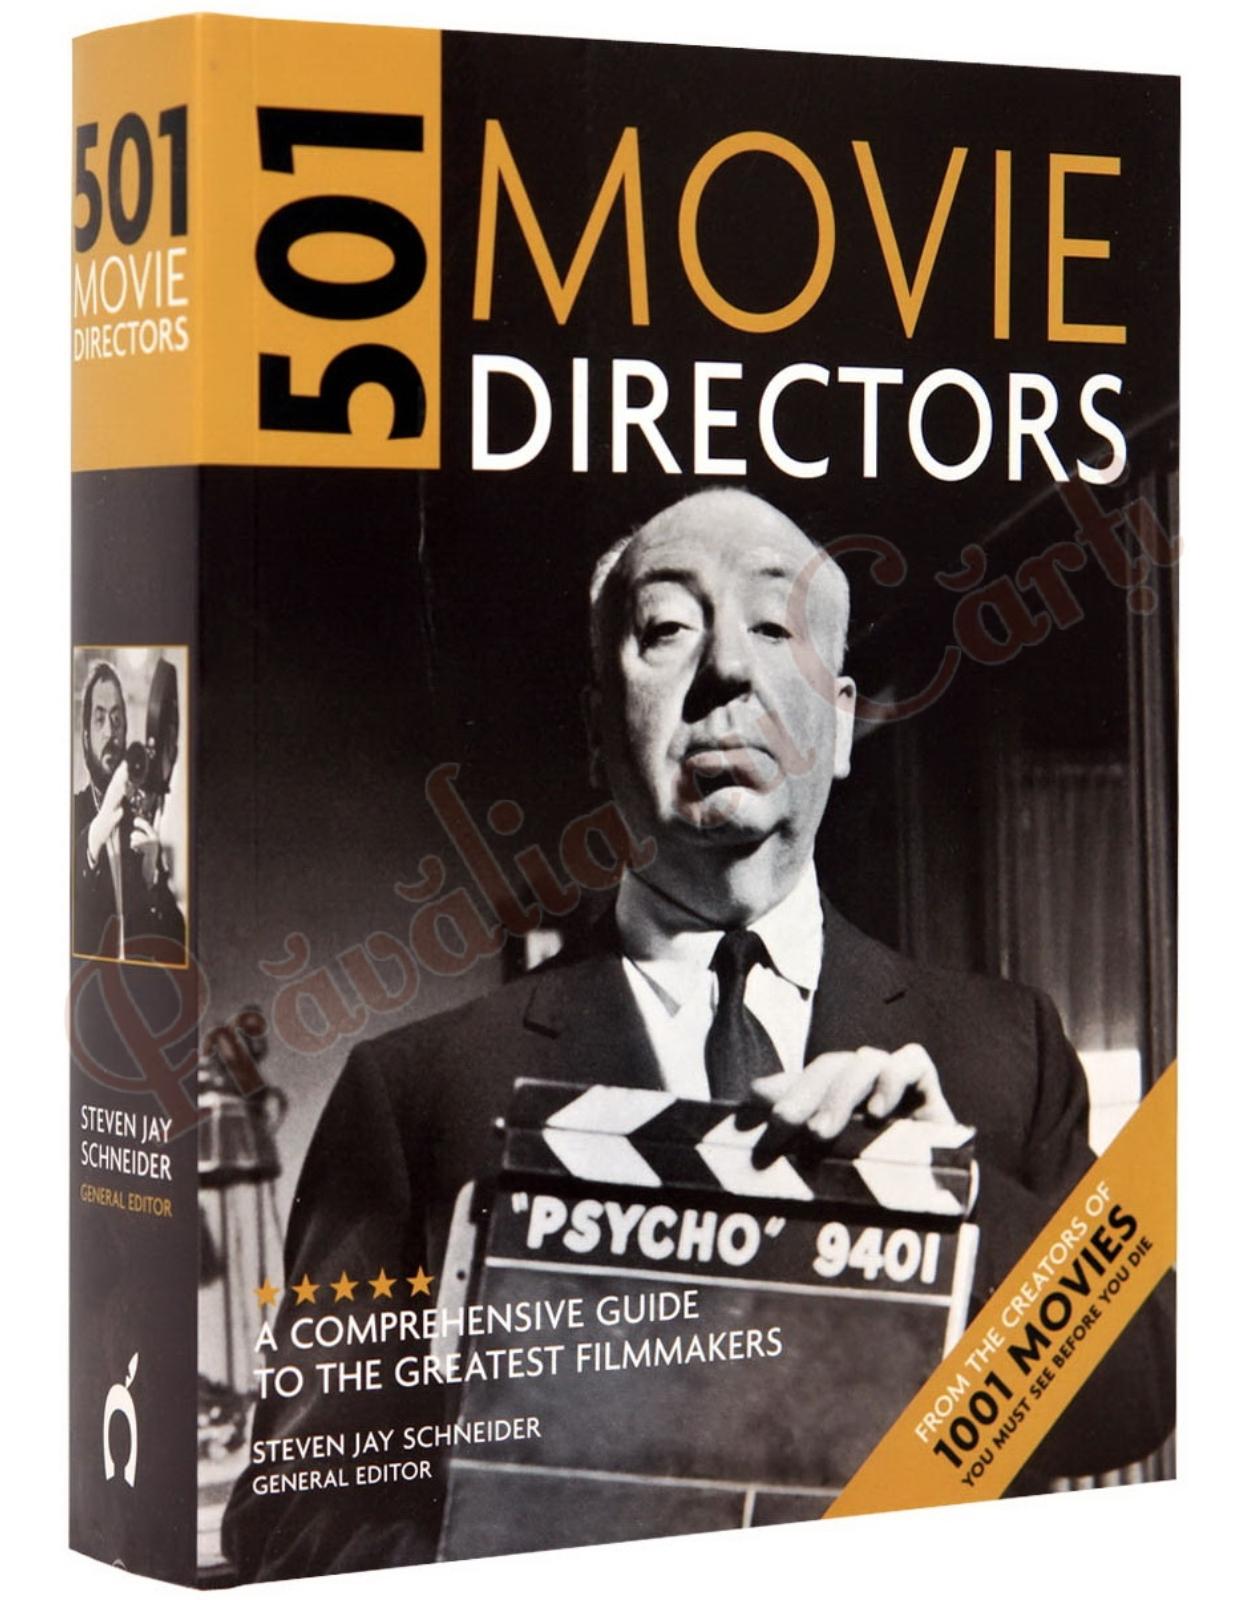 501 Movie Directors: An A-Z Guide to the Greatest Movie Directors